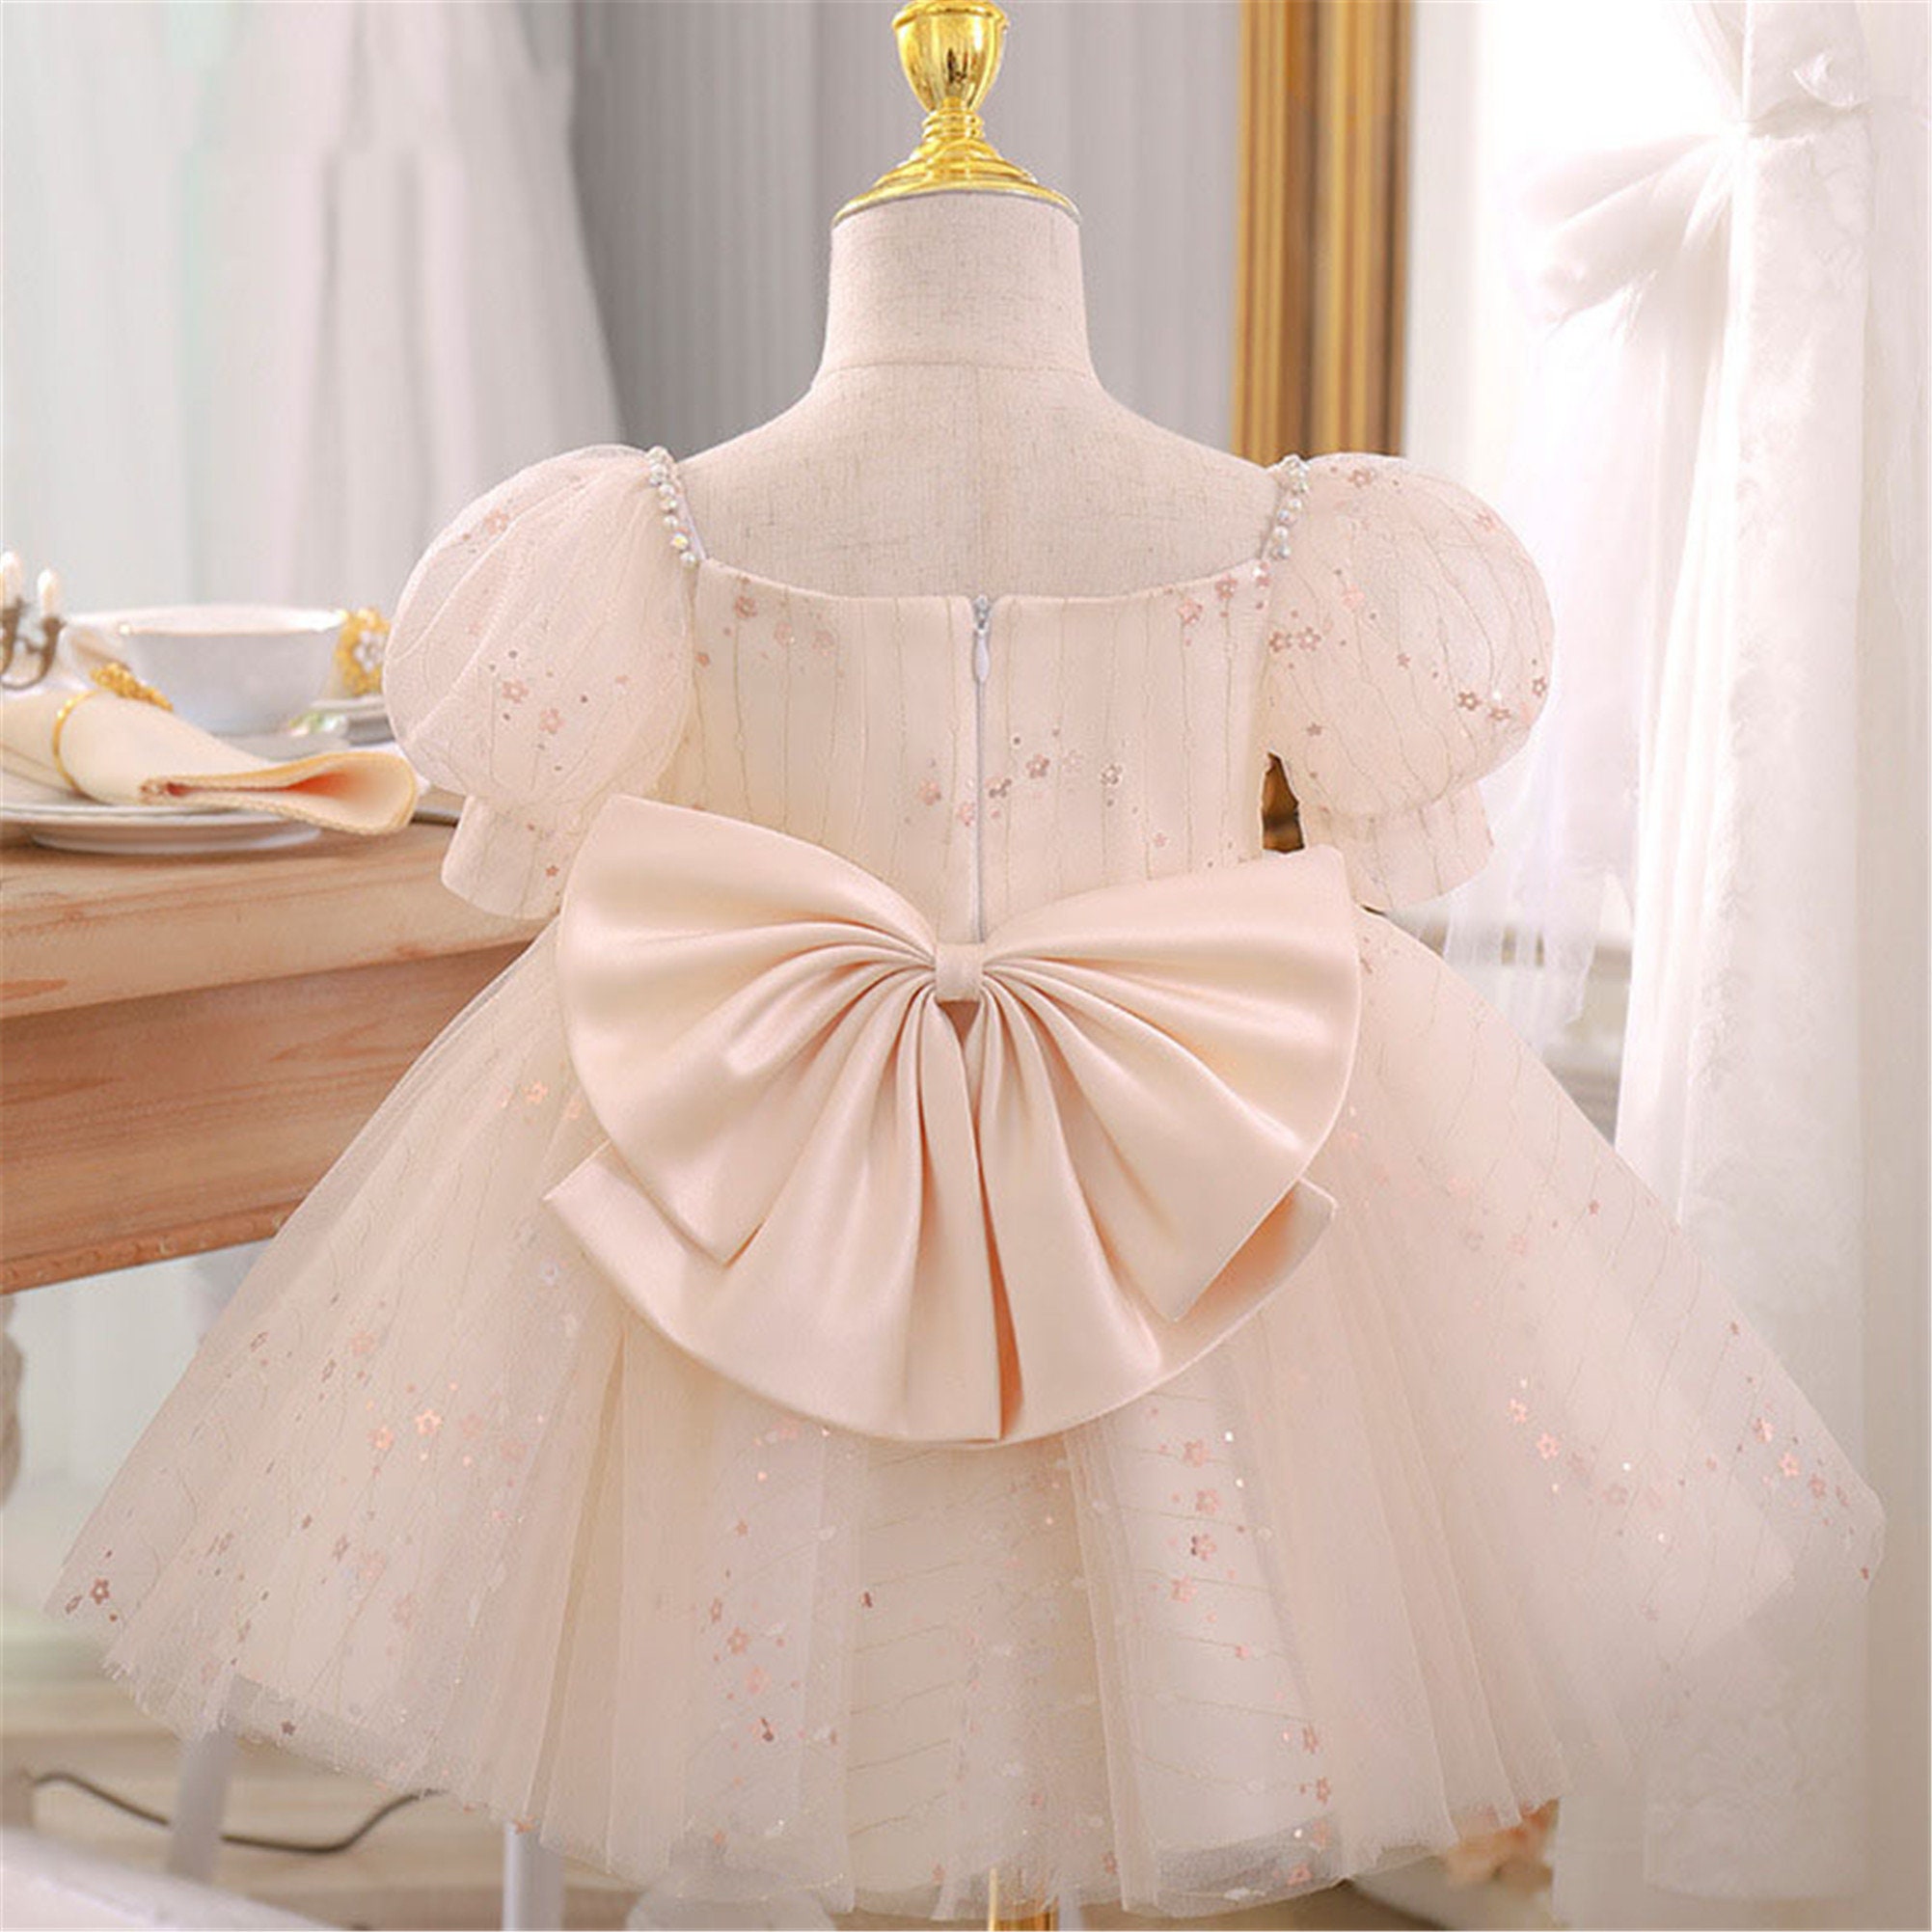 Baby Girl Birthday Dress Light Champagne Tulle Dress With - Etsy